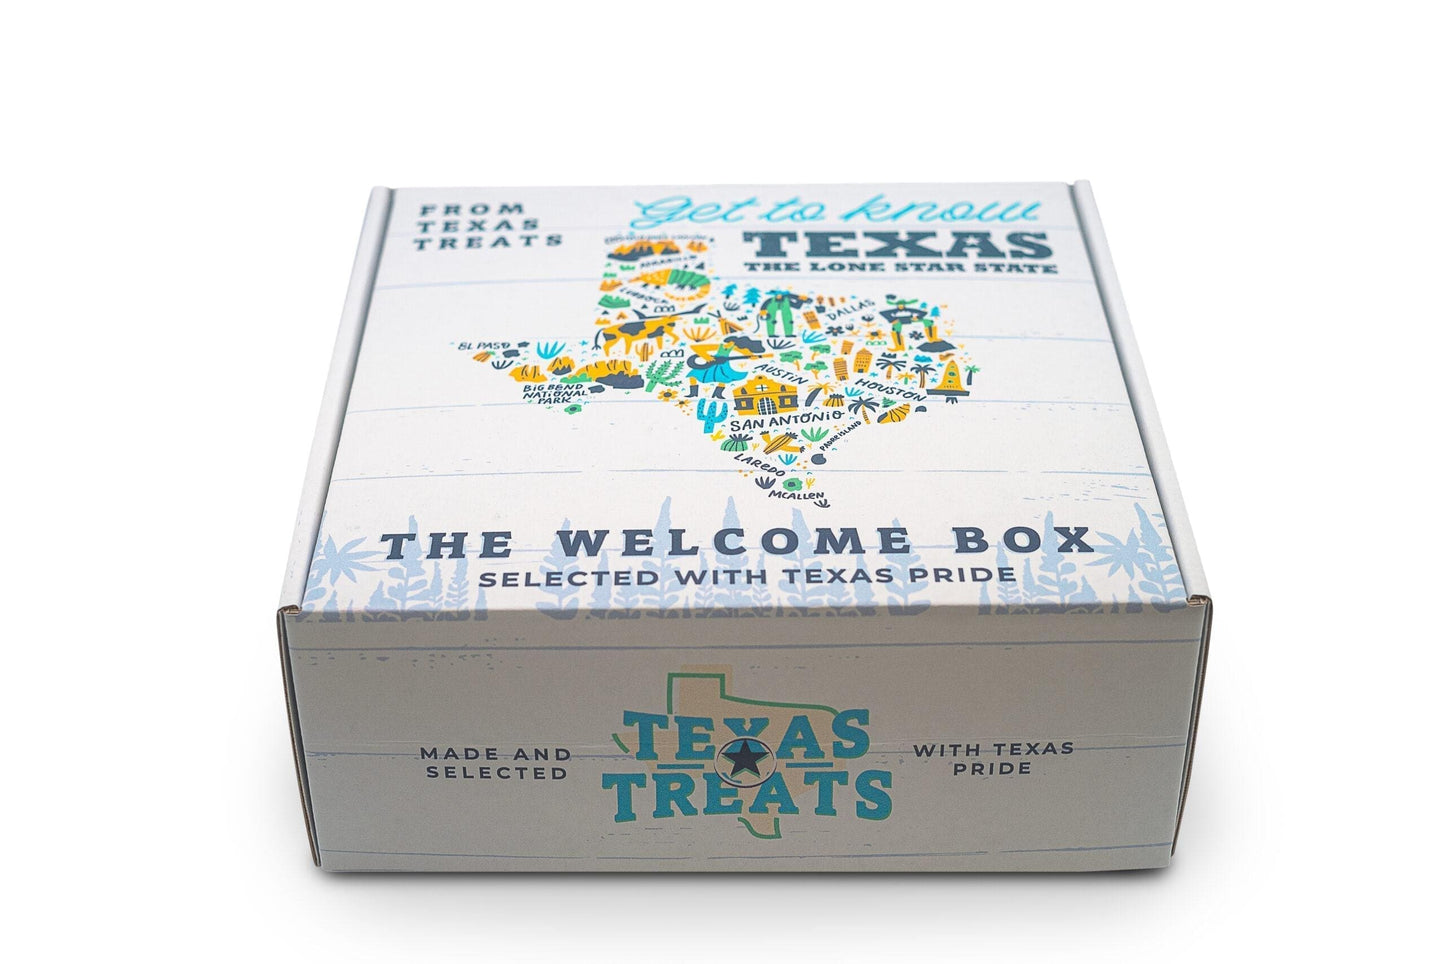 Texas Treats' Welcome gift box, available for custom corporate gifting and personal gifts.